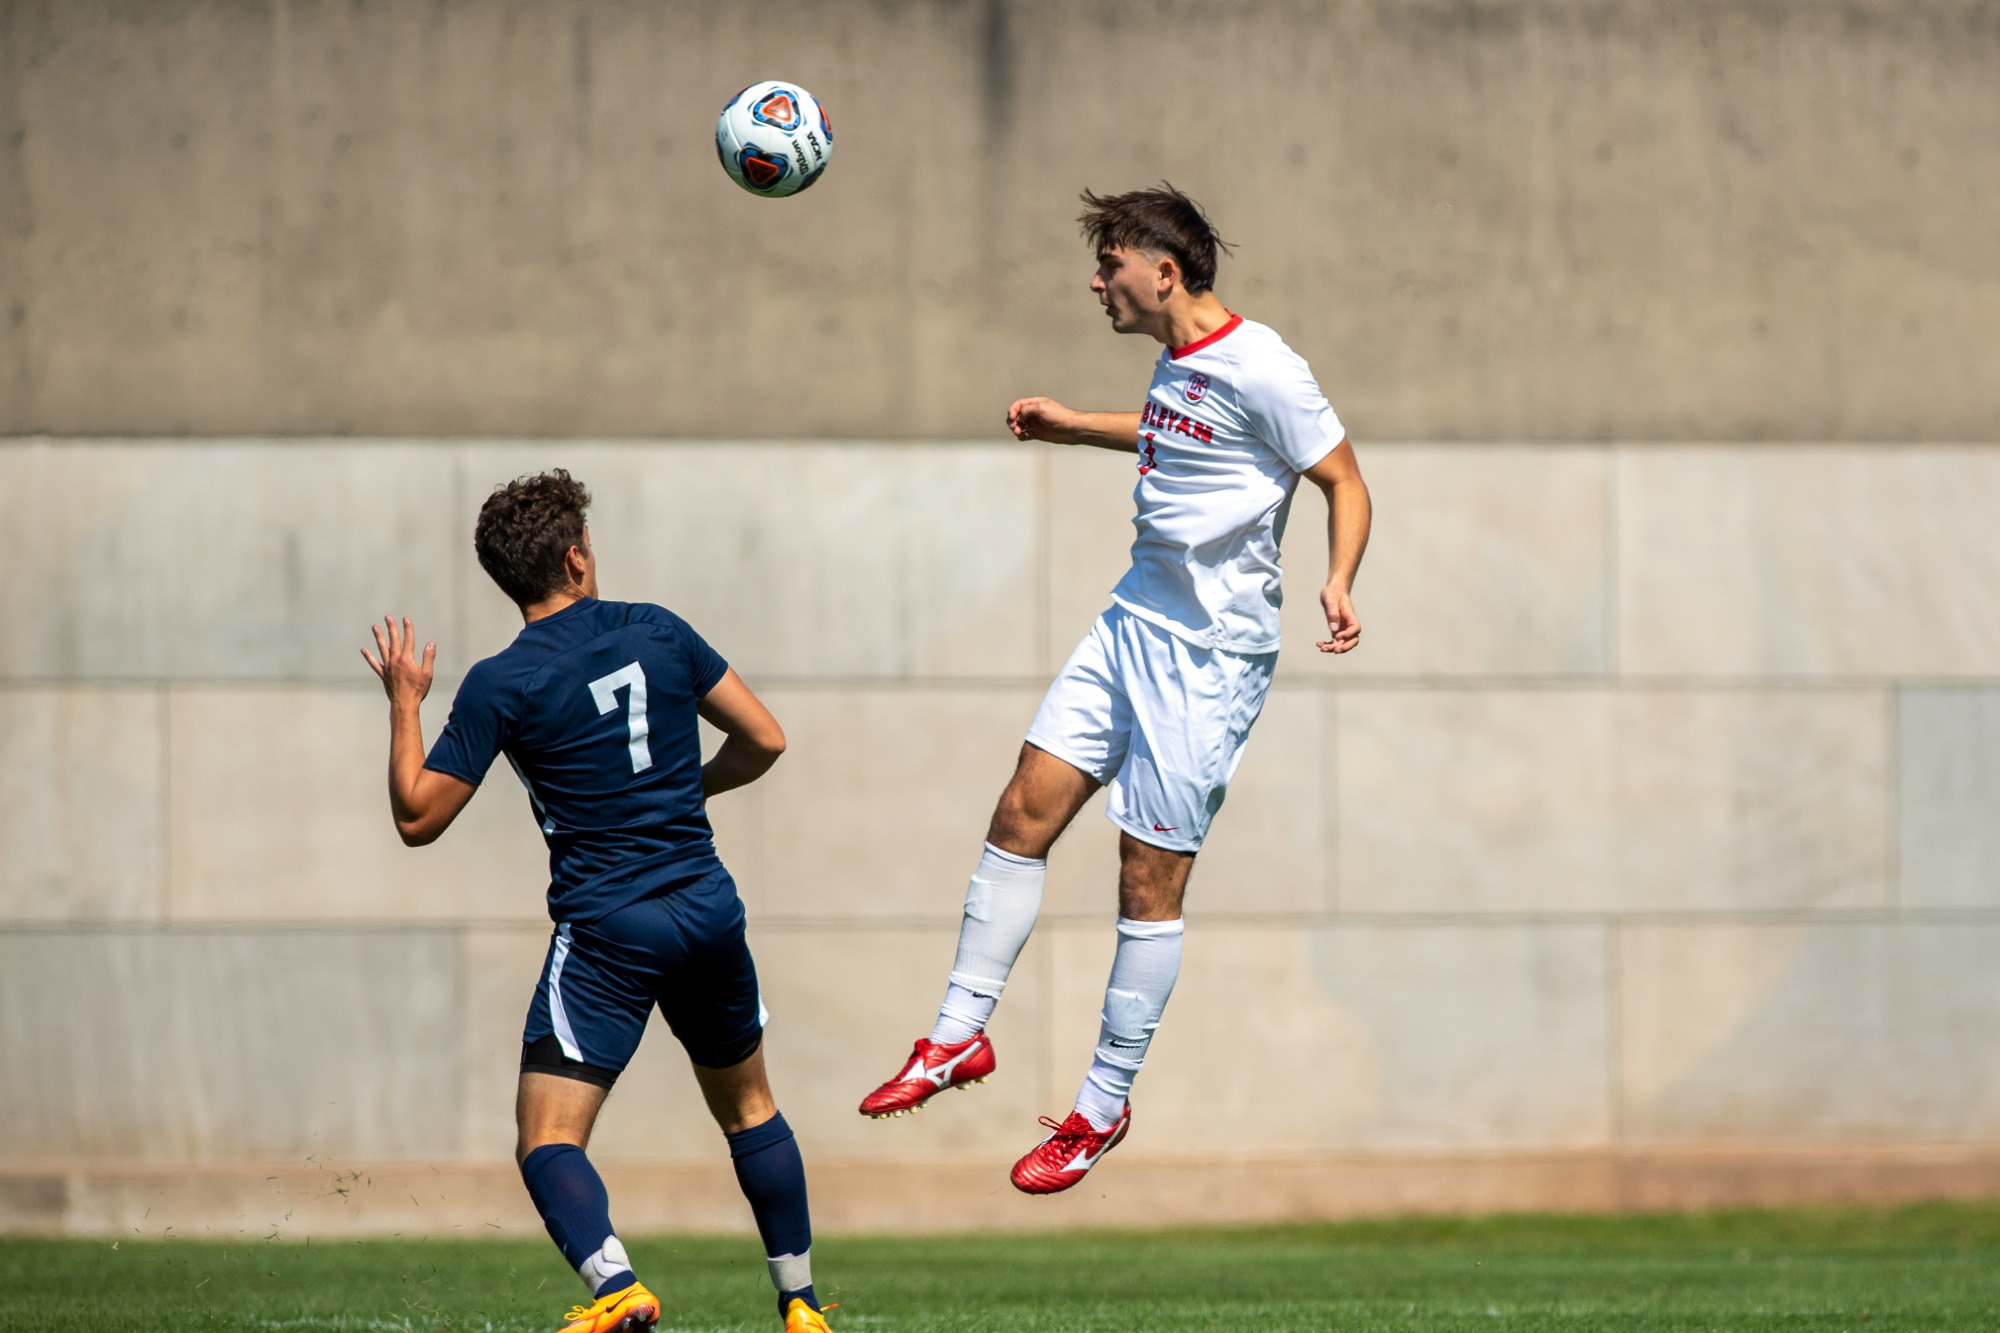 Men's Soccer Heads to Middlebury for NESCAC Quarterfinal Matchup